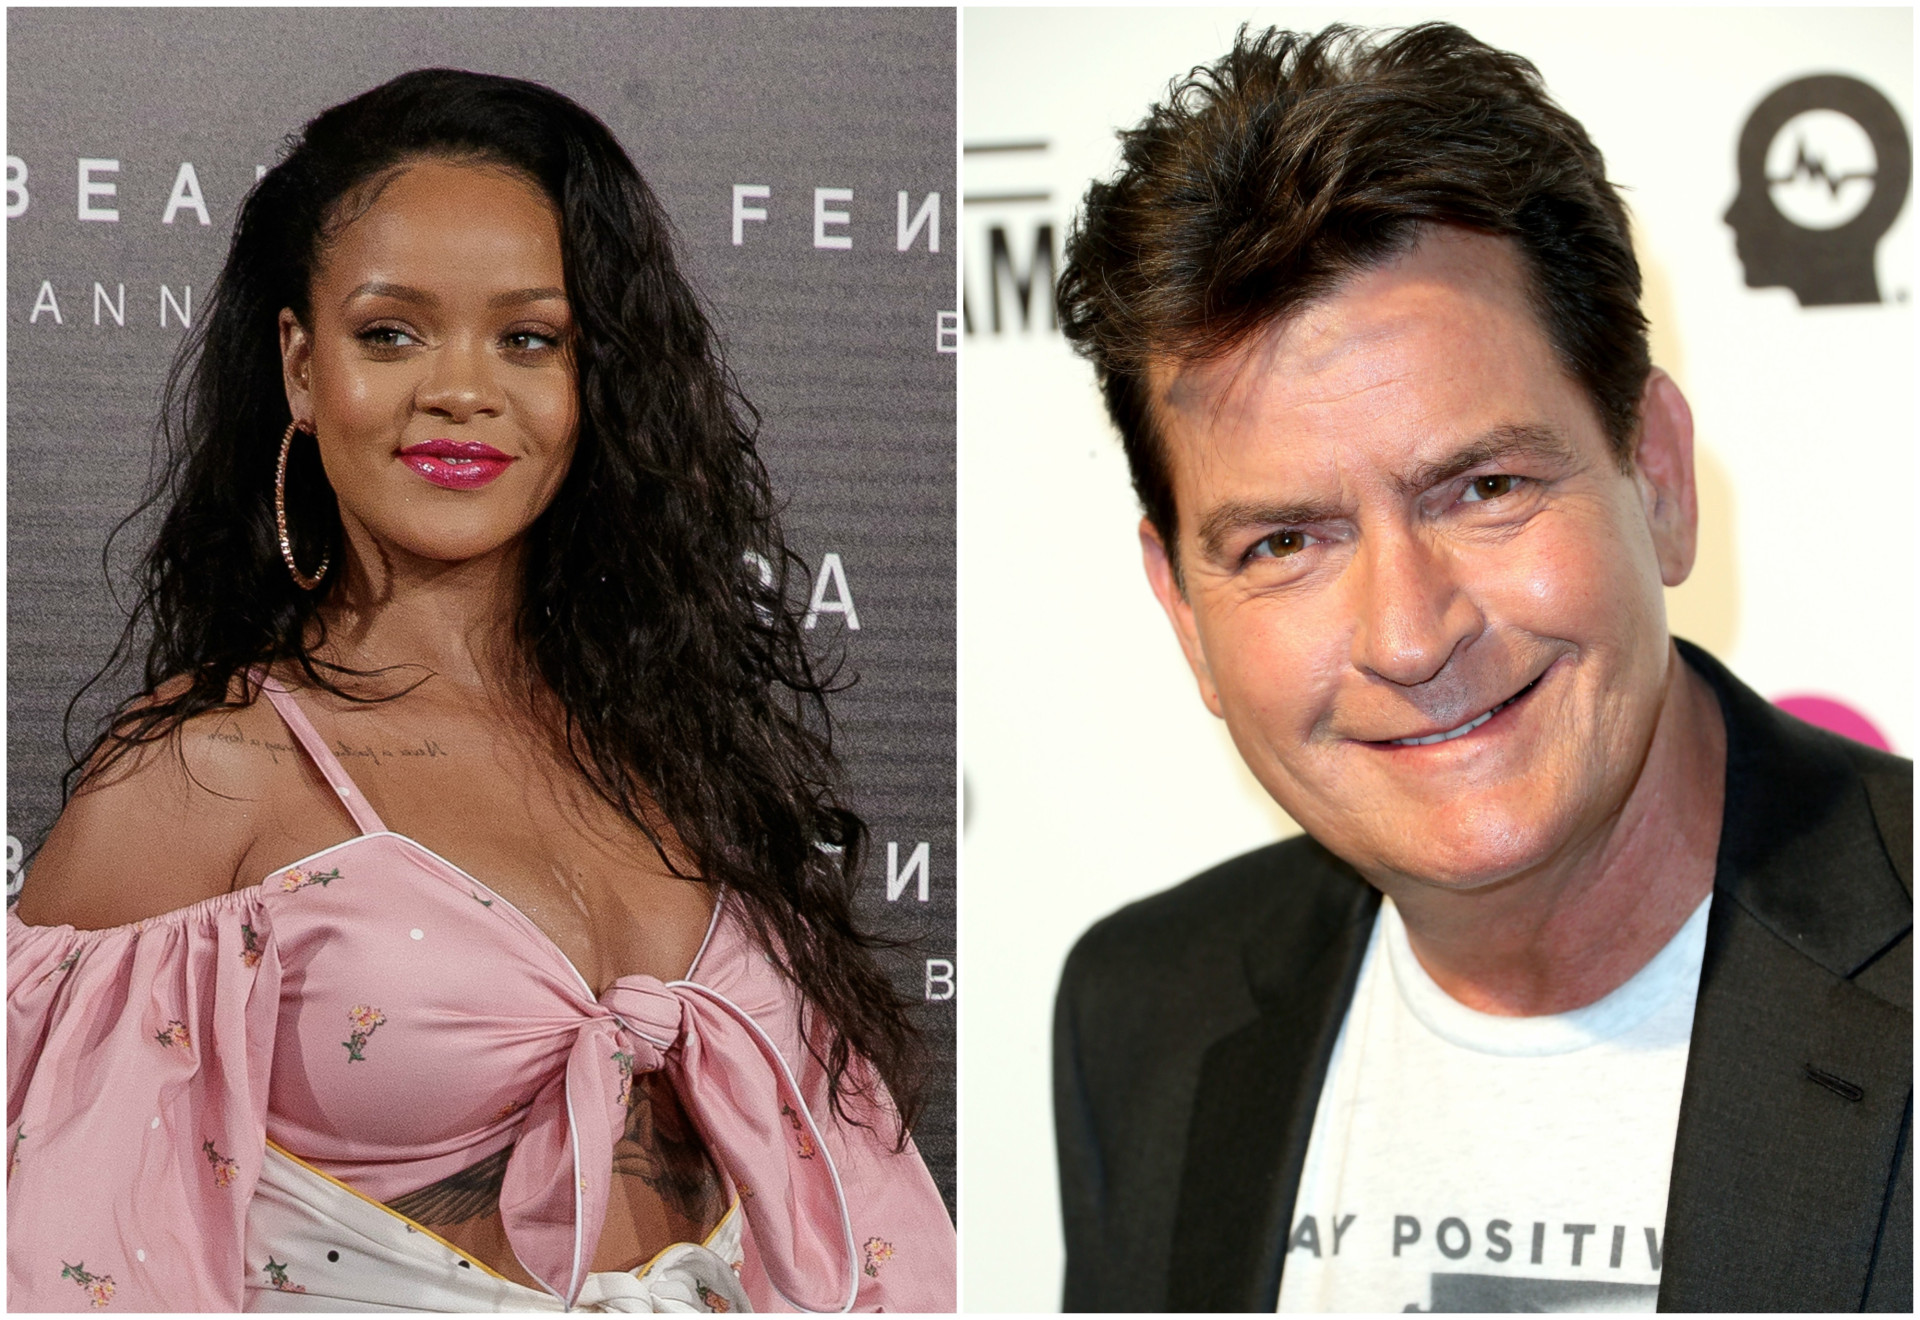 <p>Sheen expressed frustration after Rihanna declined to meet his ex, a devoted fan, and vented his anger through inflammatory posts on social media.</p><p><a href="https://www.msn.com/en-us/community/channel/vid-7xx8mnucu55yw63we9va2gwr7uihbxwc68fxqp25x6tg4ftibpra?cvid=94631541bc0f4f89bfd59158d696ad7e">Follow us and access great exclusive content every day</a></p>